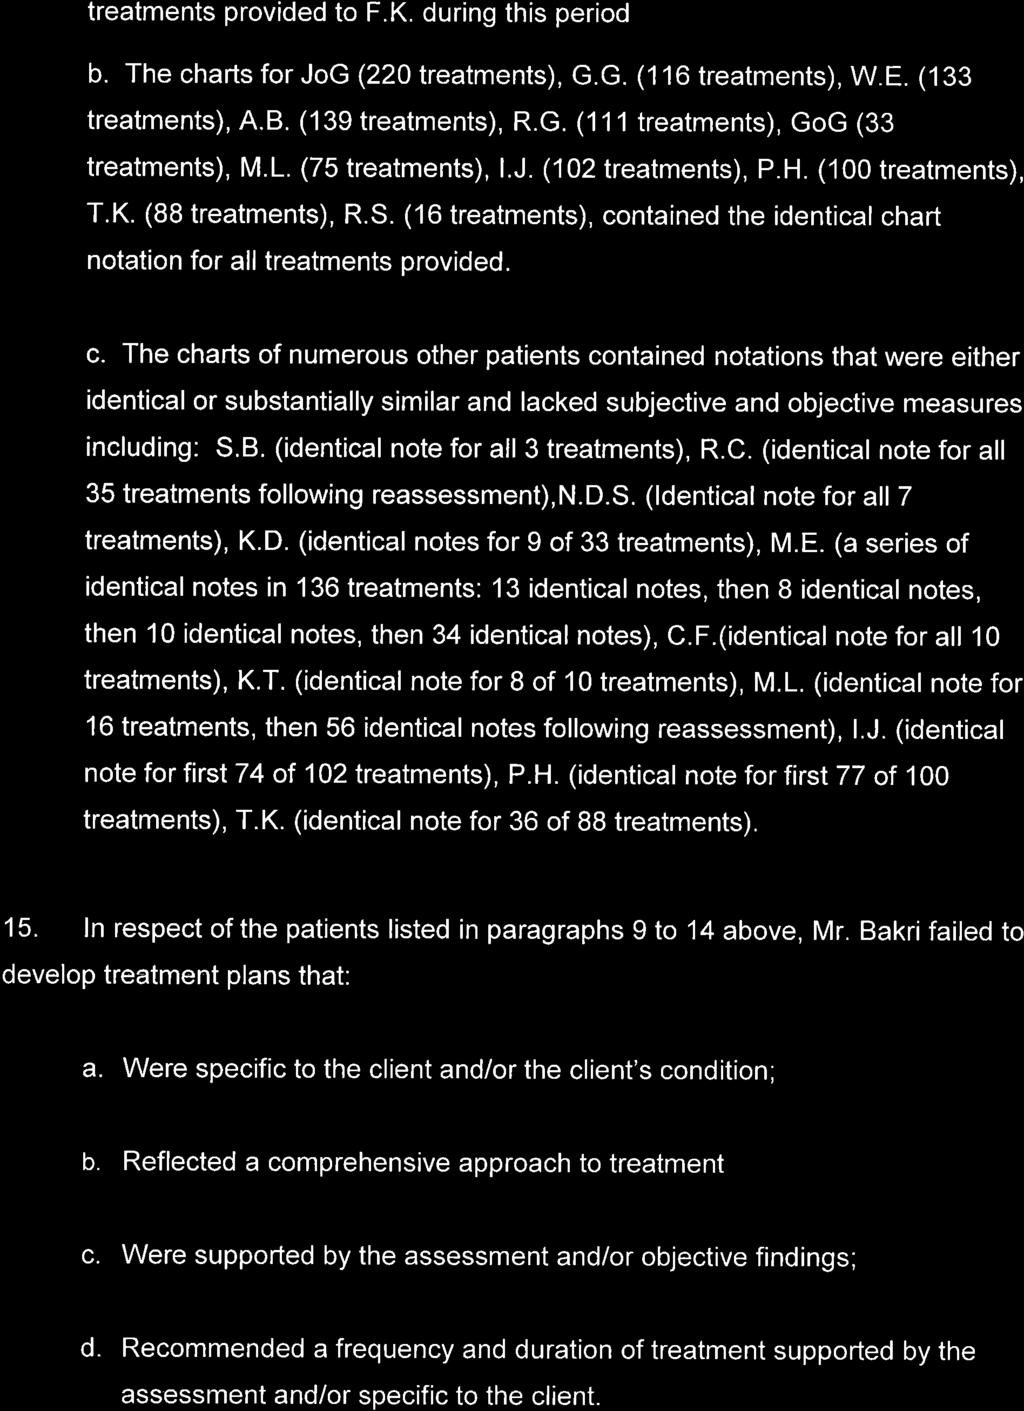 treatments provided to F.K. during this period b. The charts for JoG (220lrealments), G.G. (116 treatments), W.E. (133 treatments), A.B. (139 treatments), R.G. (111 treatments), GoG (33 treatments), M.